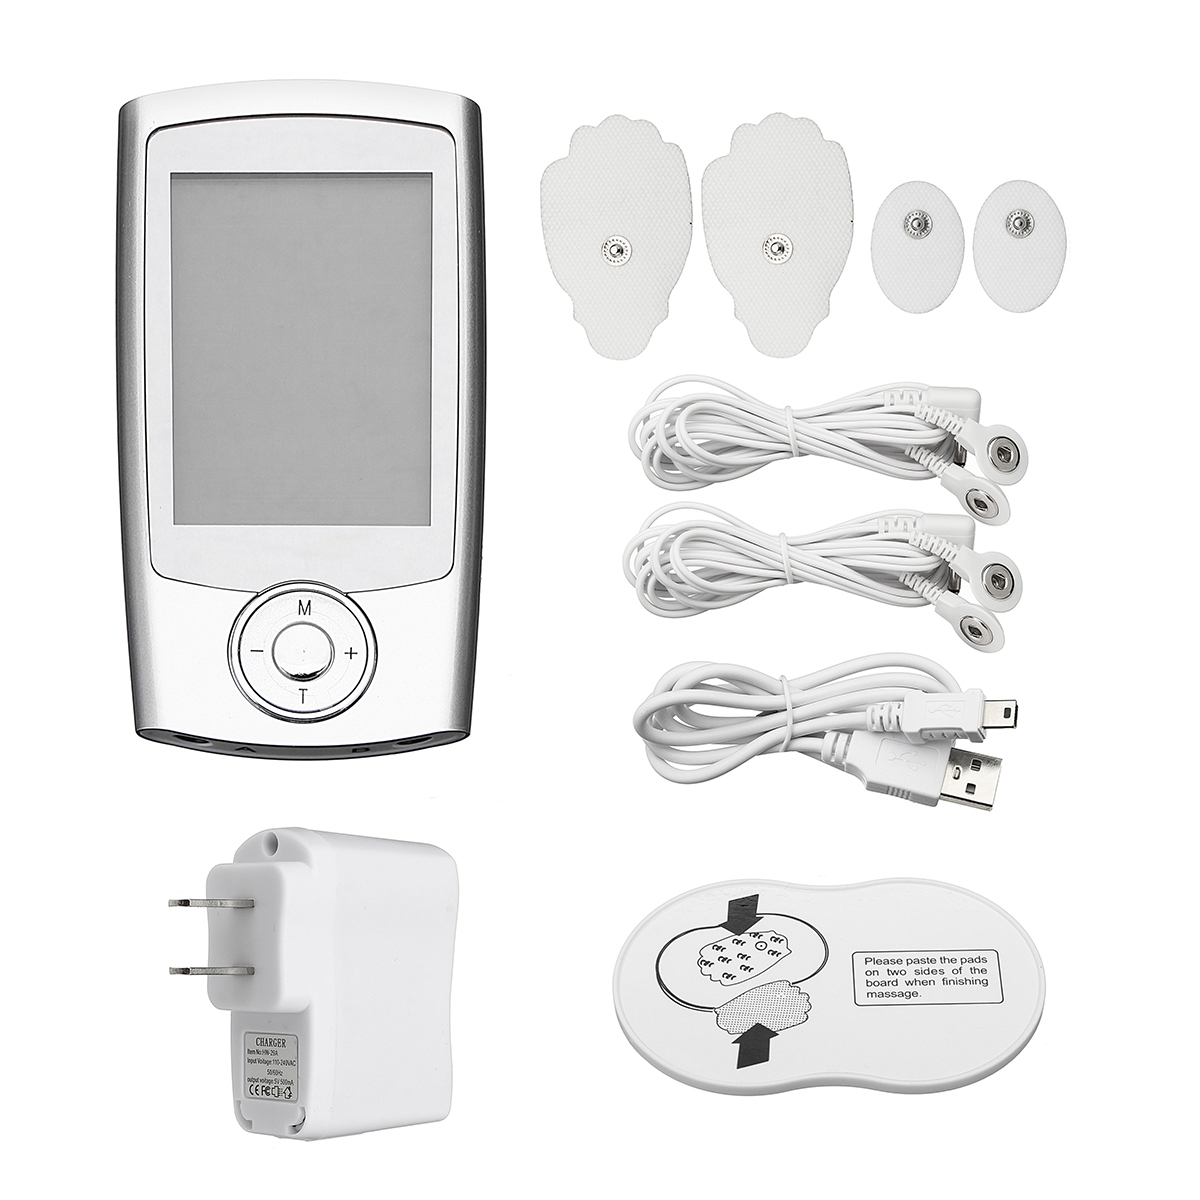 16-Modes-Tens-Unit-with-4-Pads-Pulse-Impulse-Pain-Relief-Machine-Electric-Massager-Muscle-Stimulator-1402466